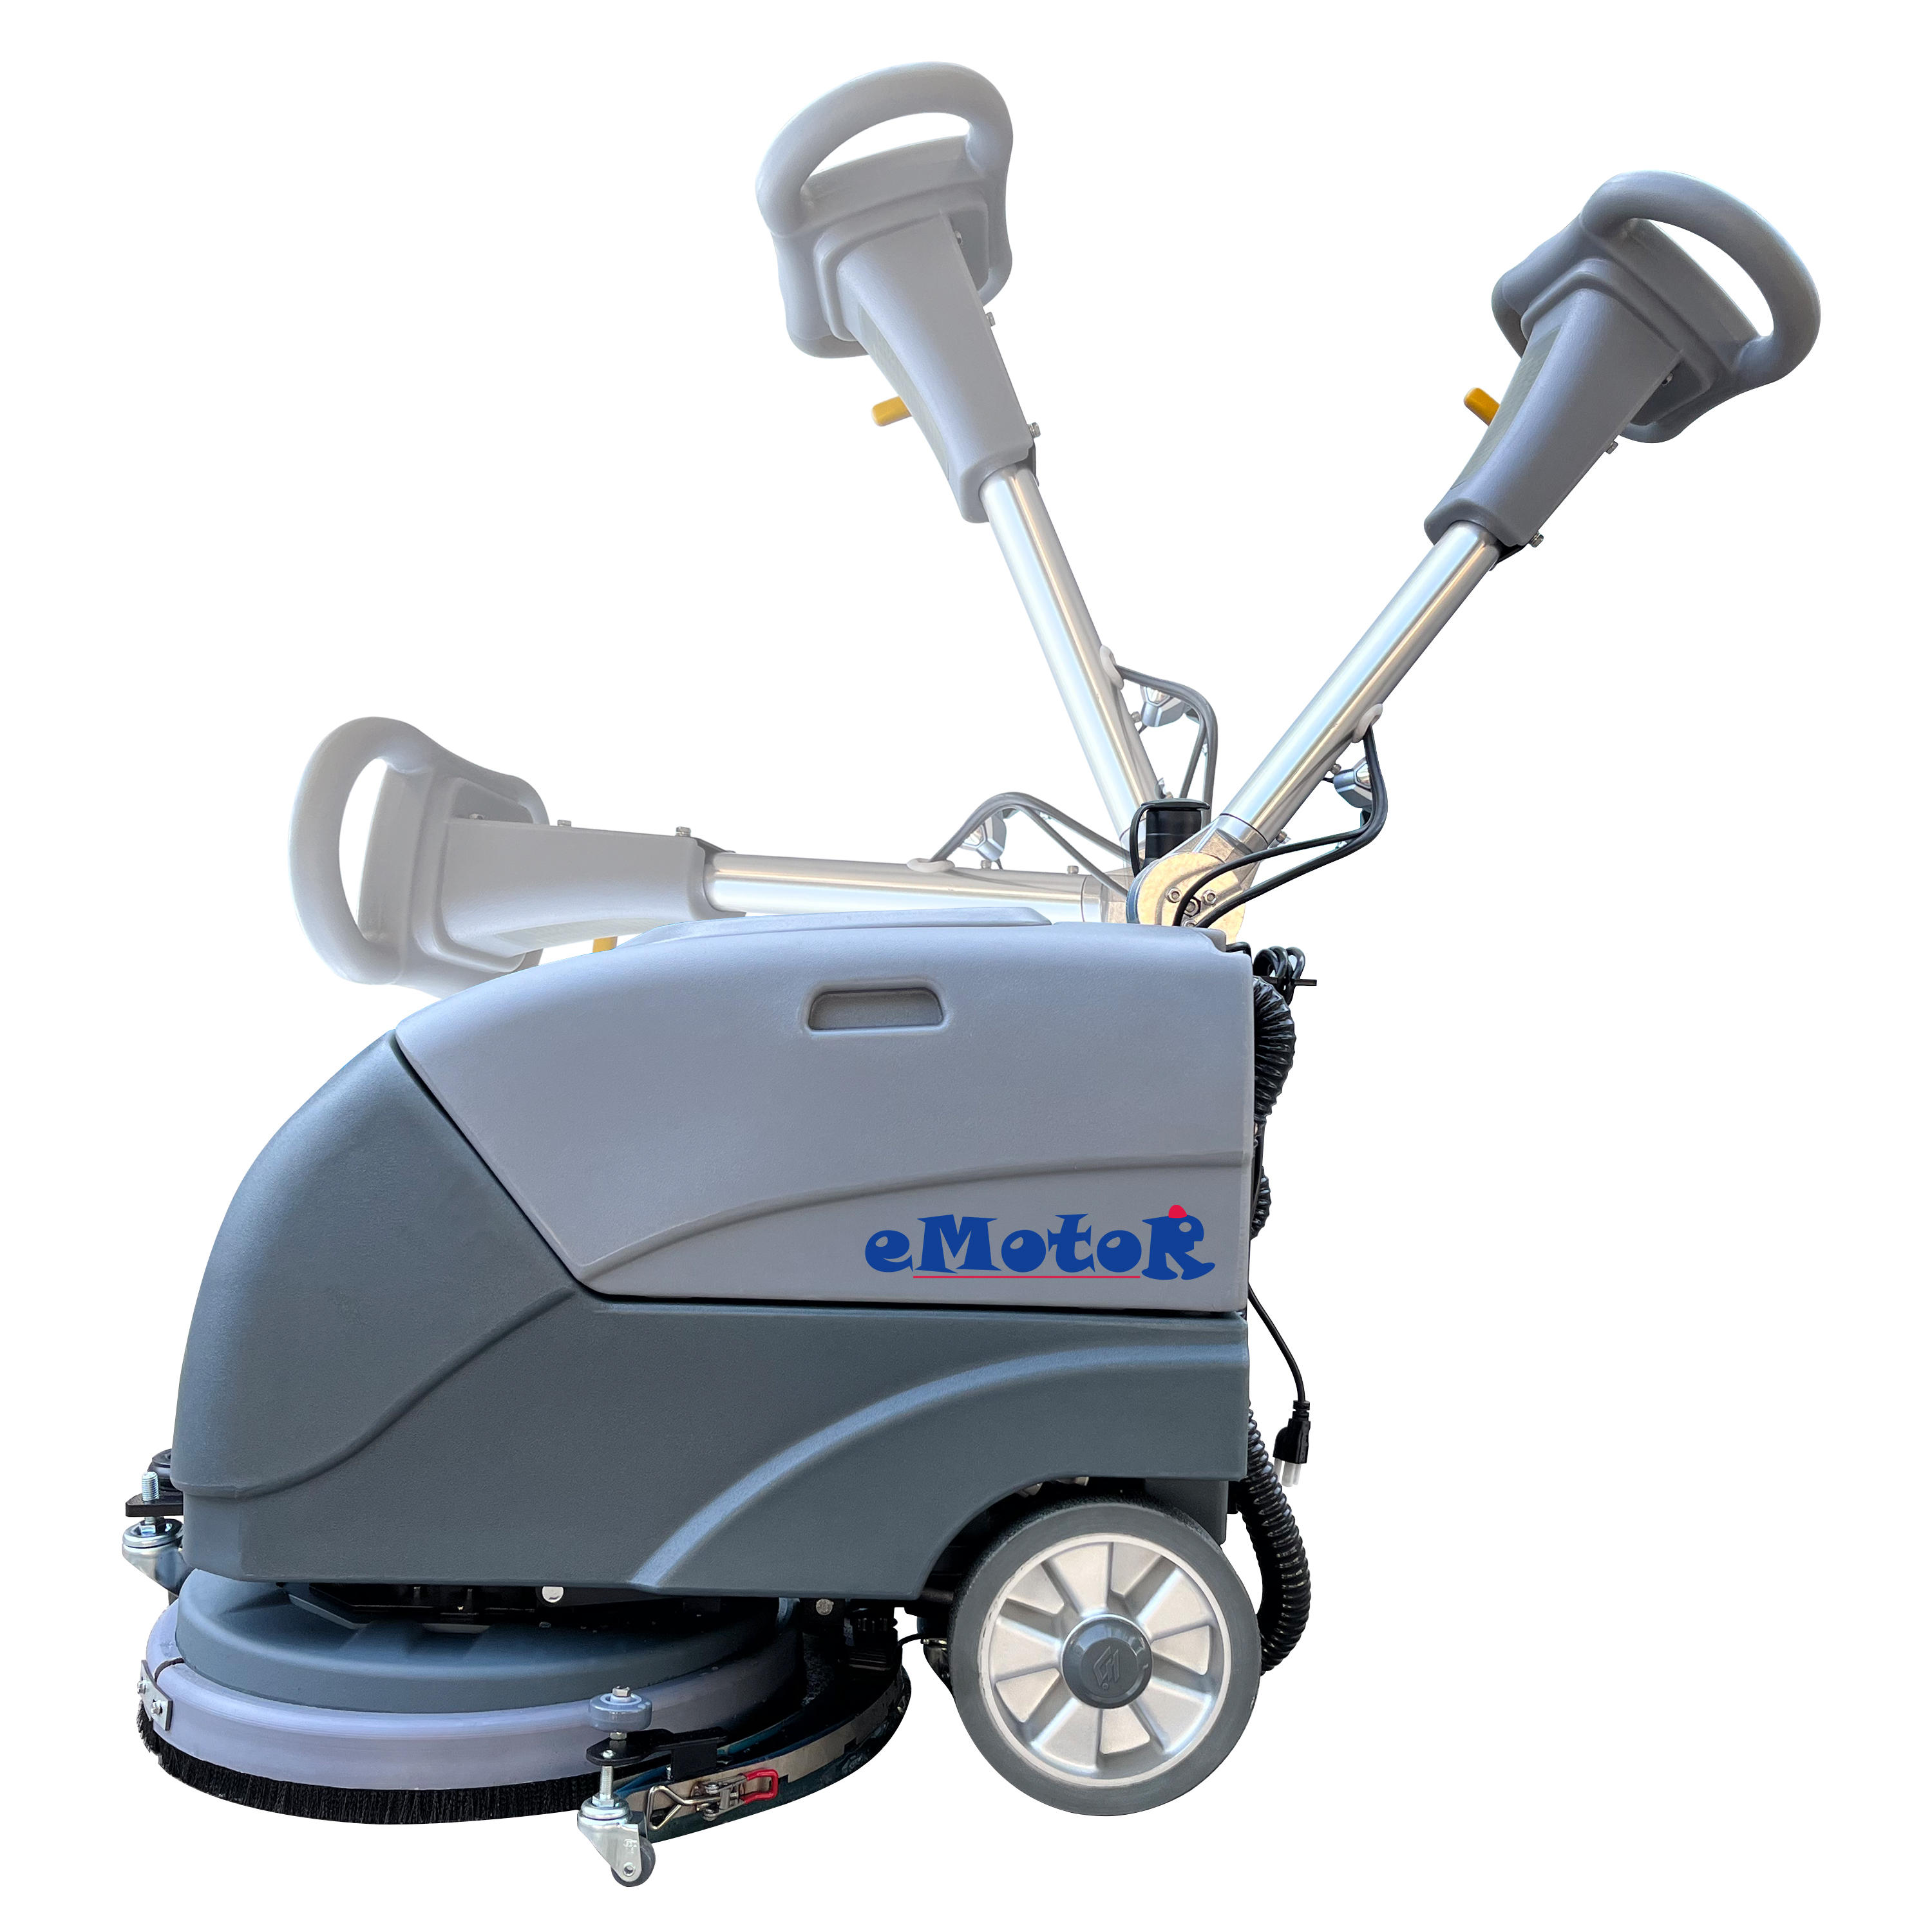 How has the use of industrial floor scrubber machines revolutionized the cleaning industry?